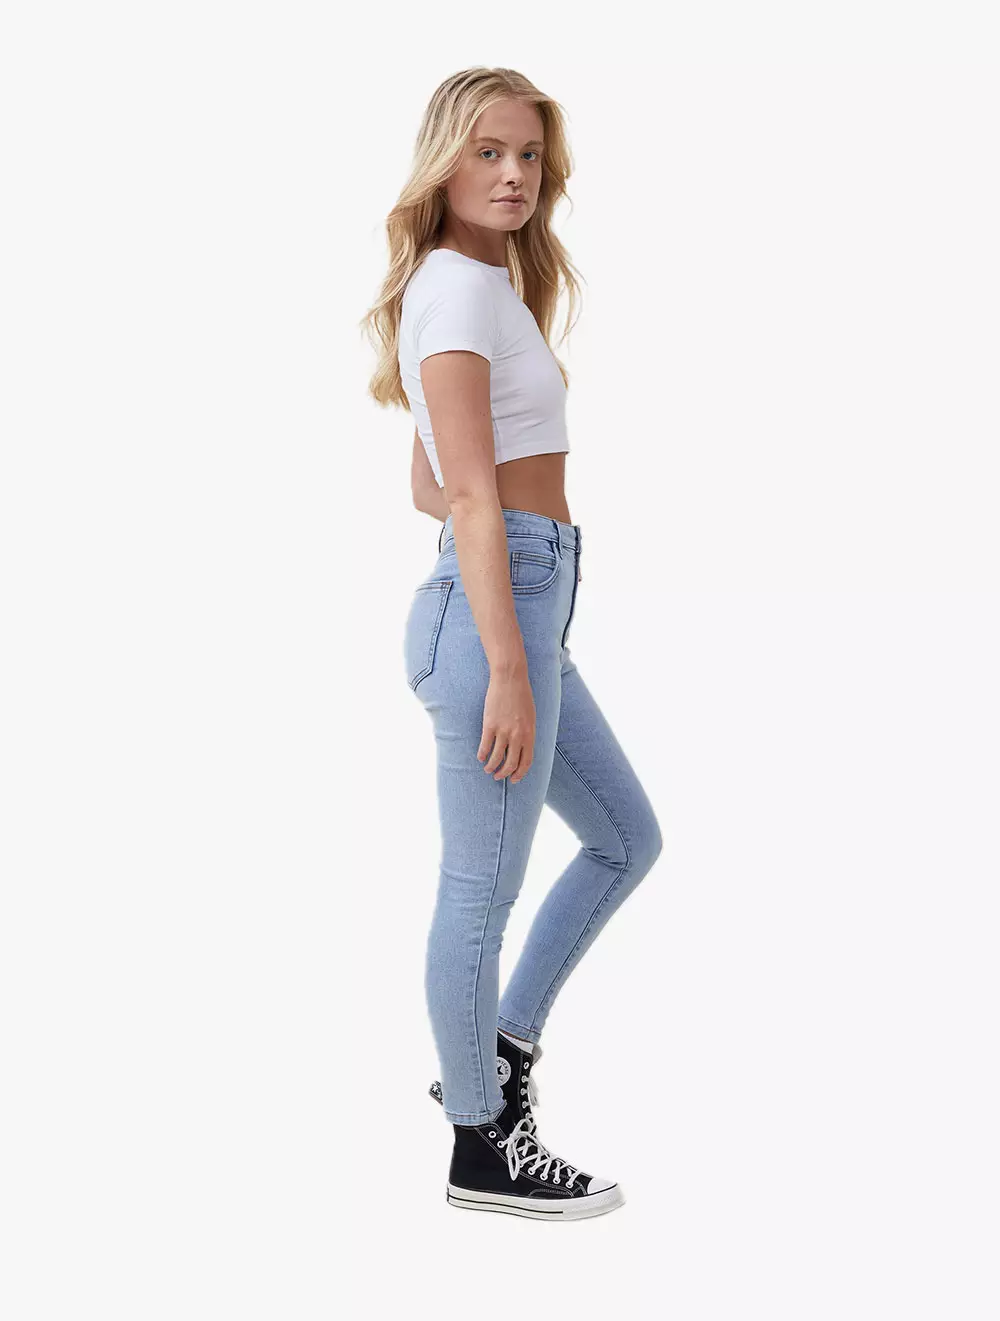 Cotton:On high rise cropped skinny jean in light wash blue